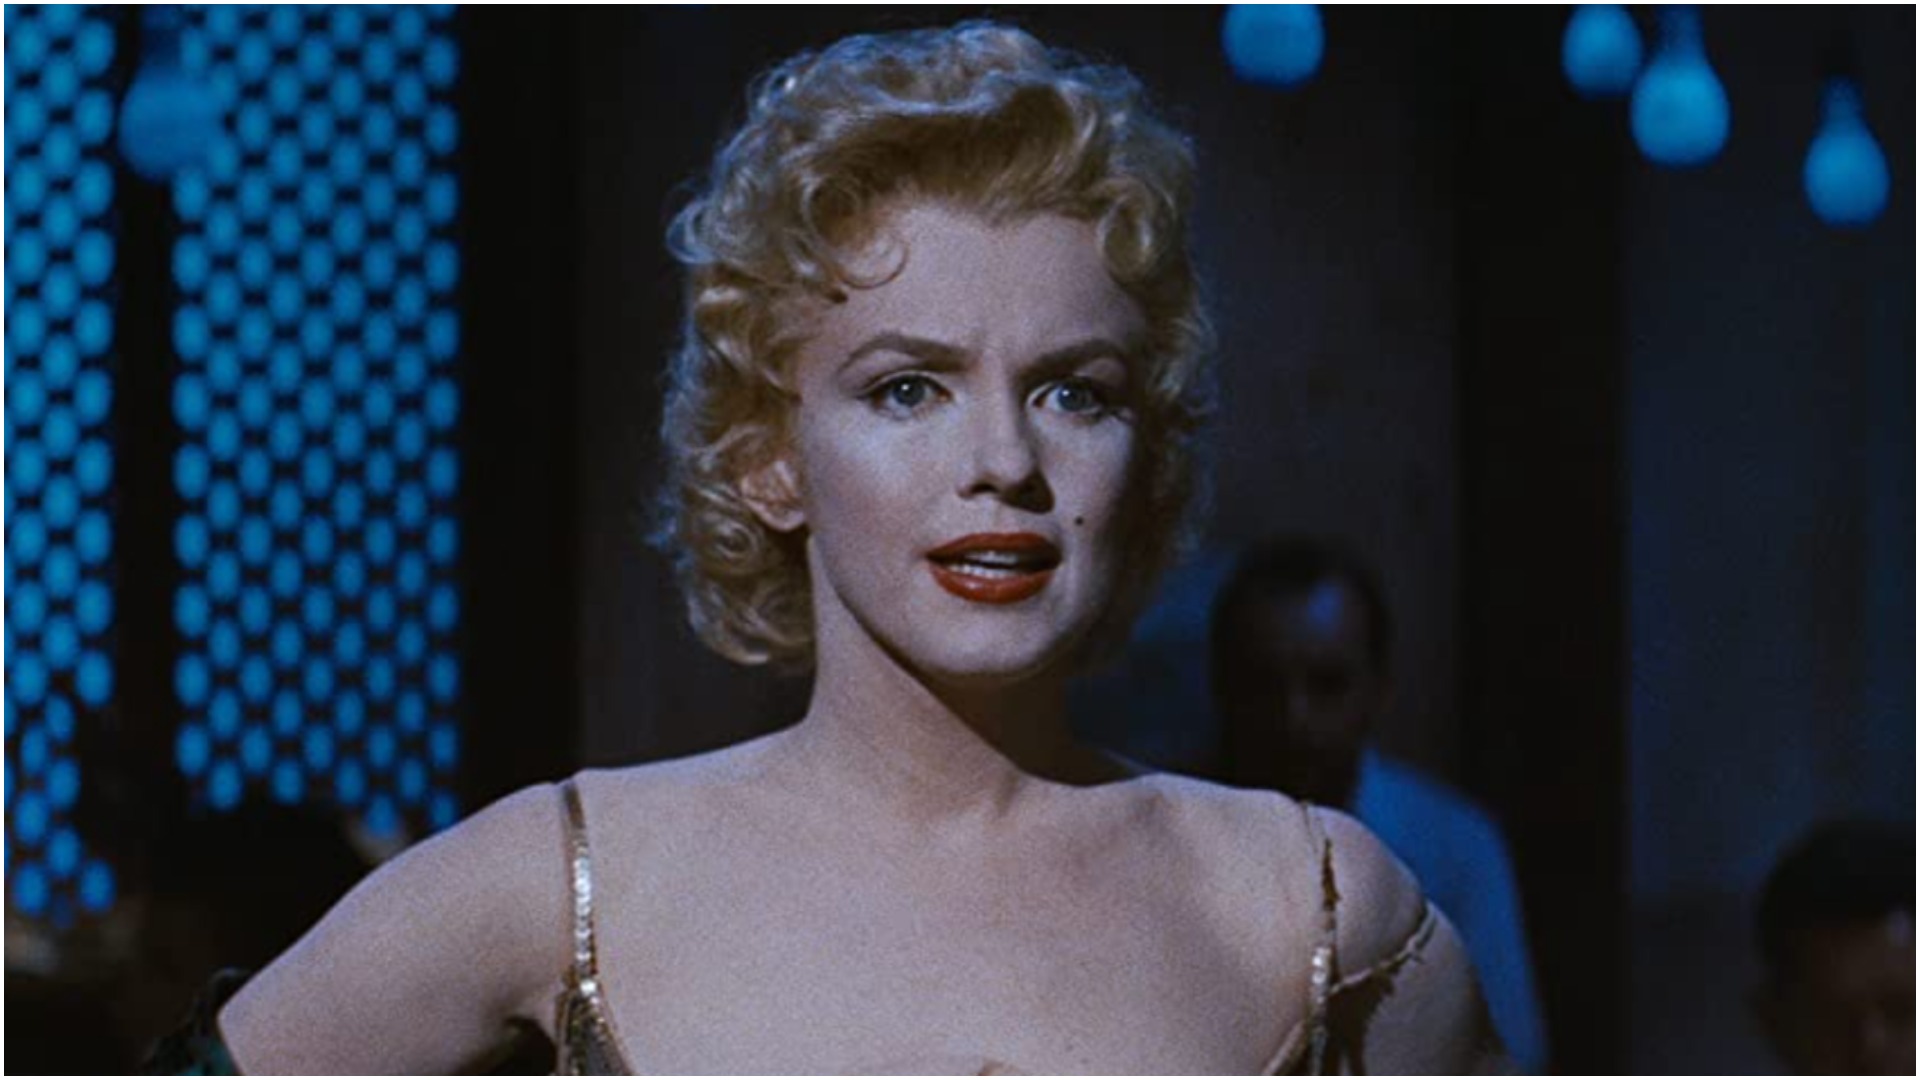 Reframed: Marilyn Monroe review – a persuasive look at the icon's